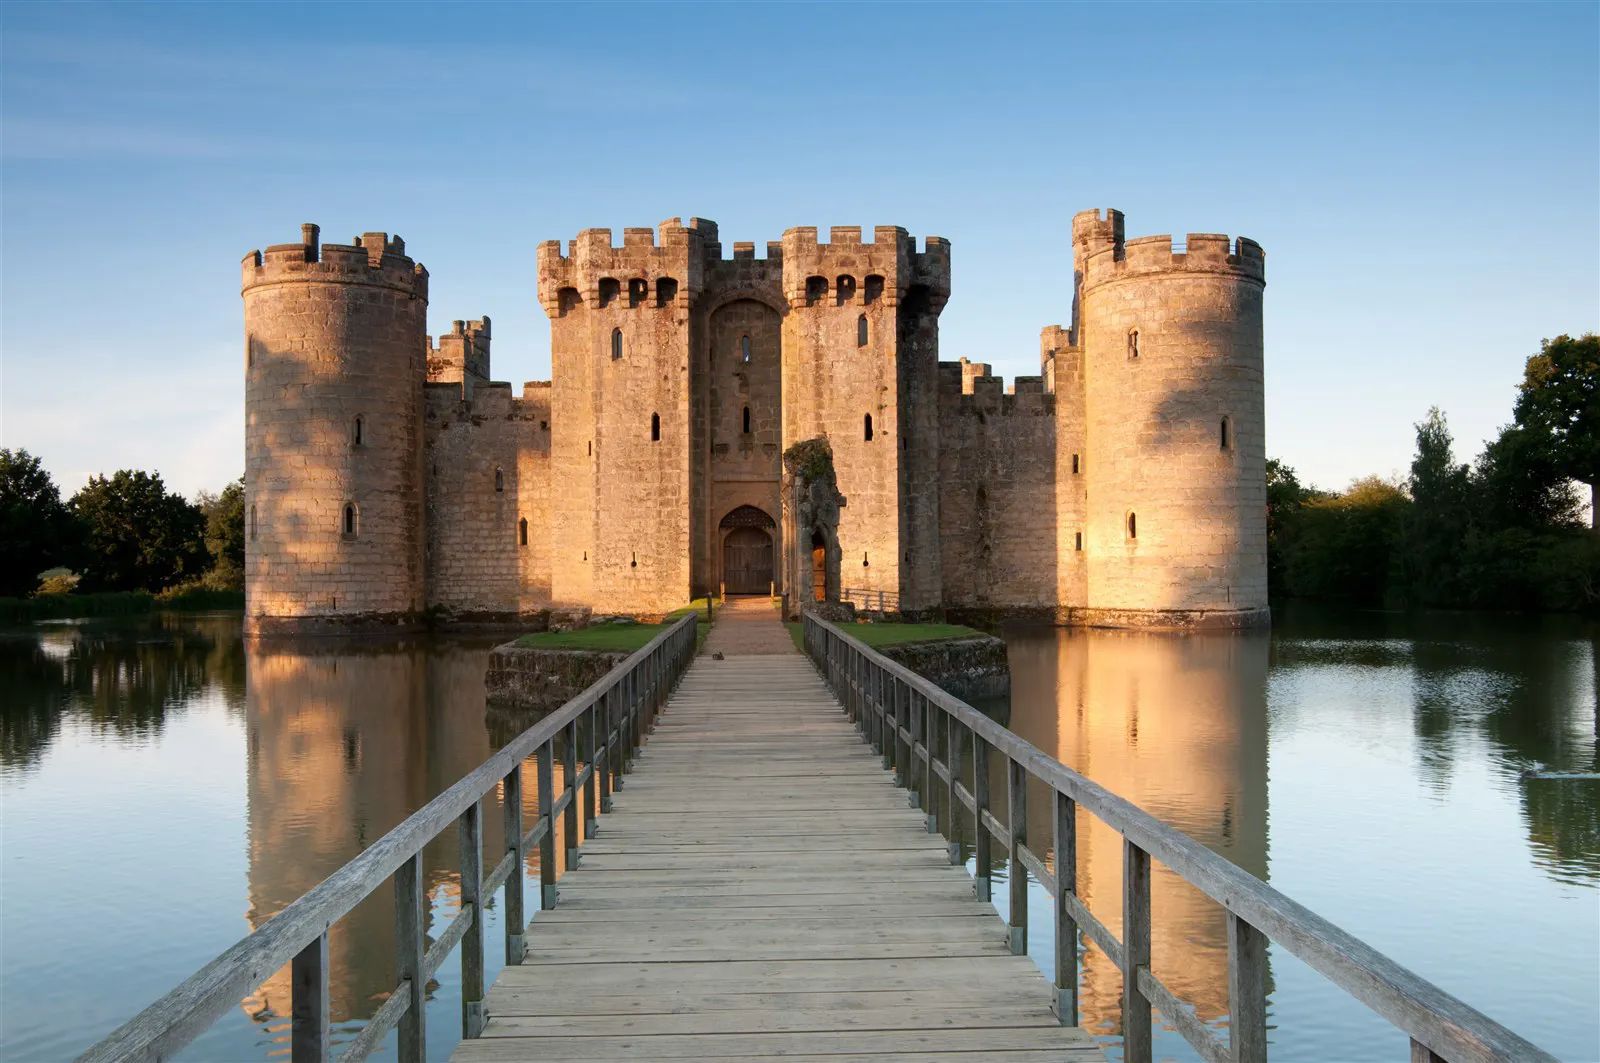 Have you seen the best castles in the UK?